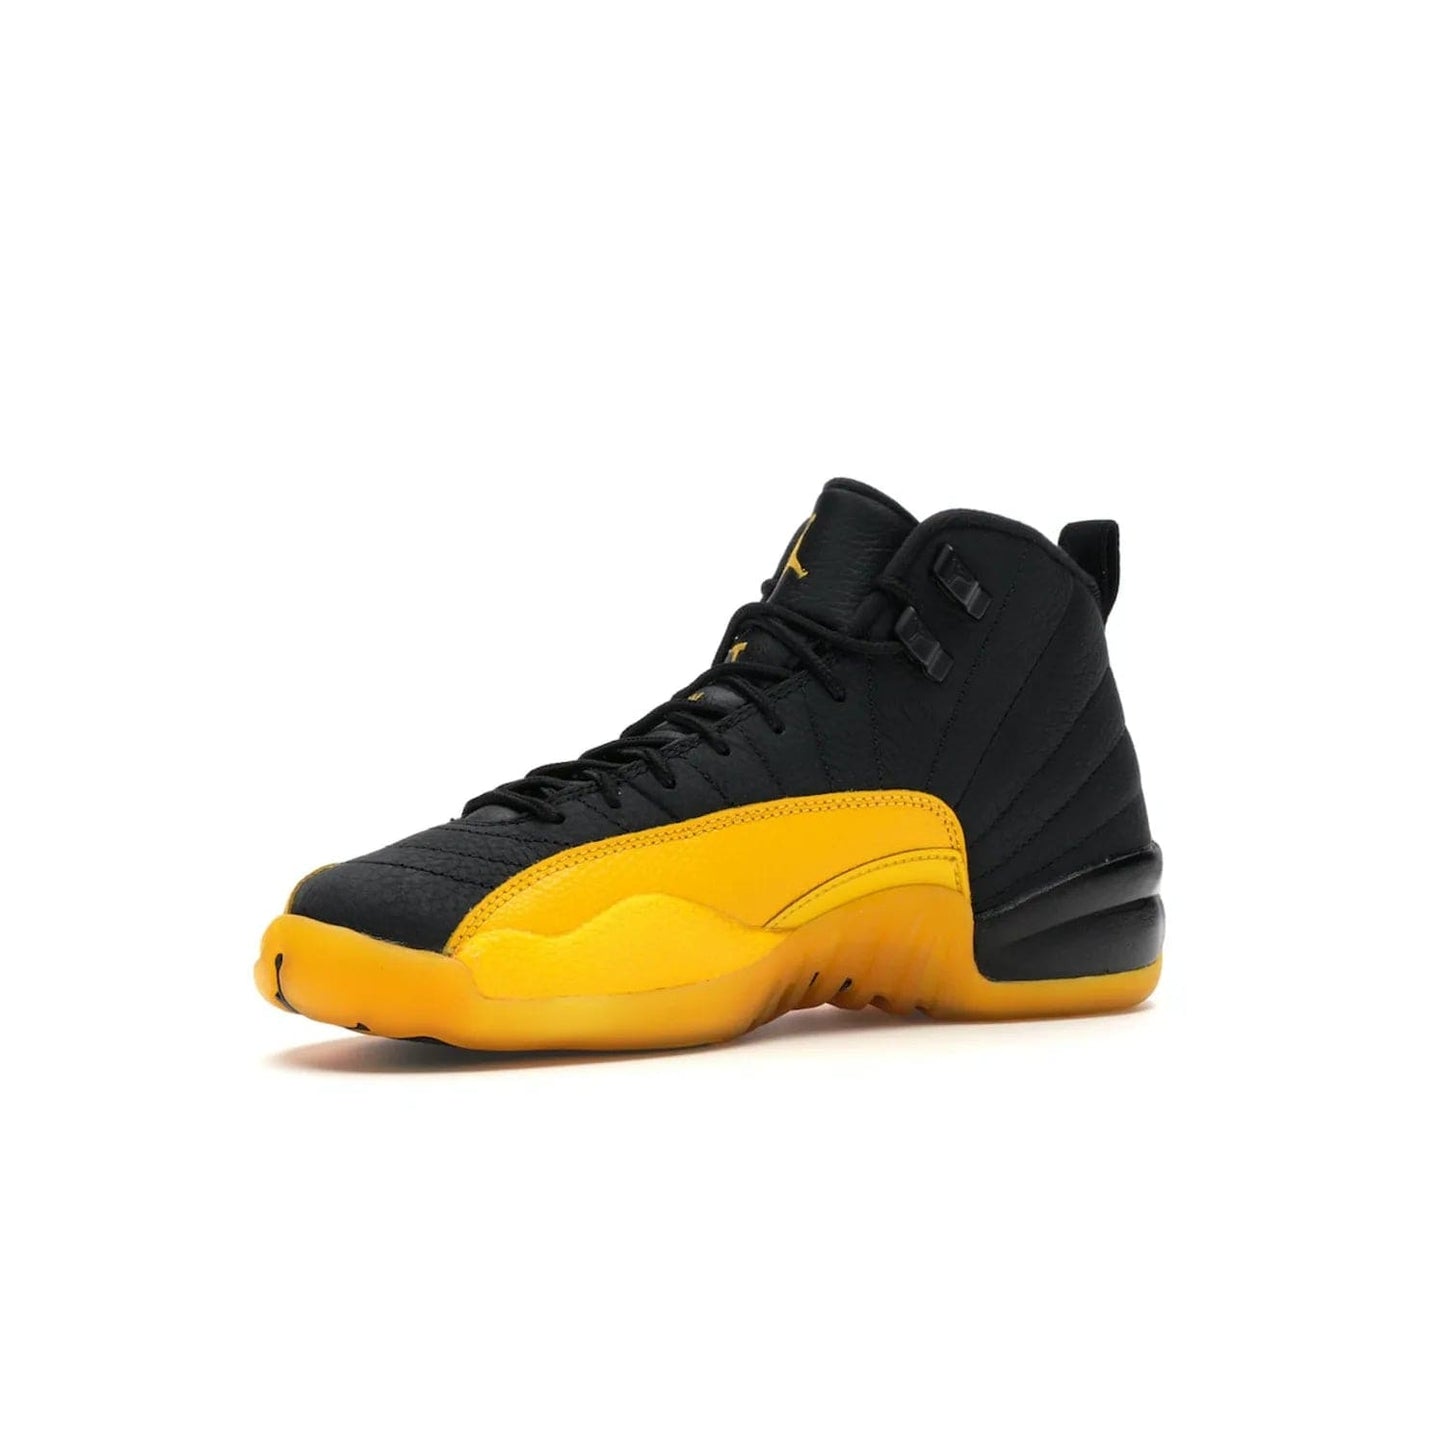 Jordan 12 Retro Black University Gold (GS) - Image 16 - Only at www.BallersClubKickz.com - Upgrade your kid's shoe collection with the Jordan 12 Retro Black University Gold. With classic style, black tumbled leather upper, and University Gold accents, it's a great summer look. Out July 2020.